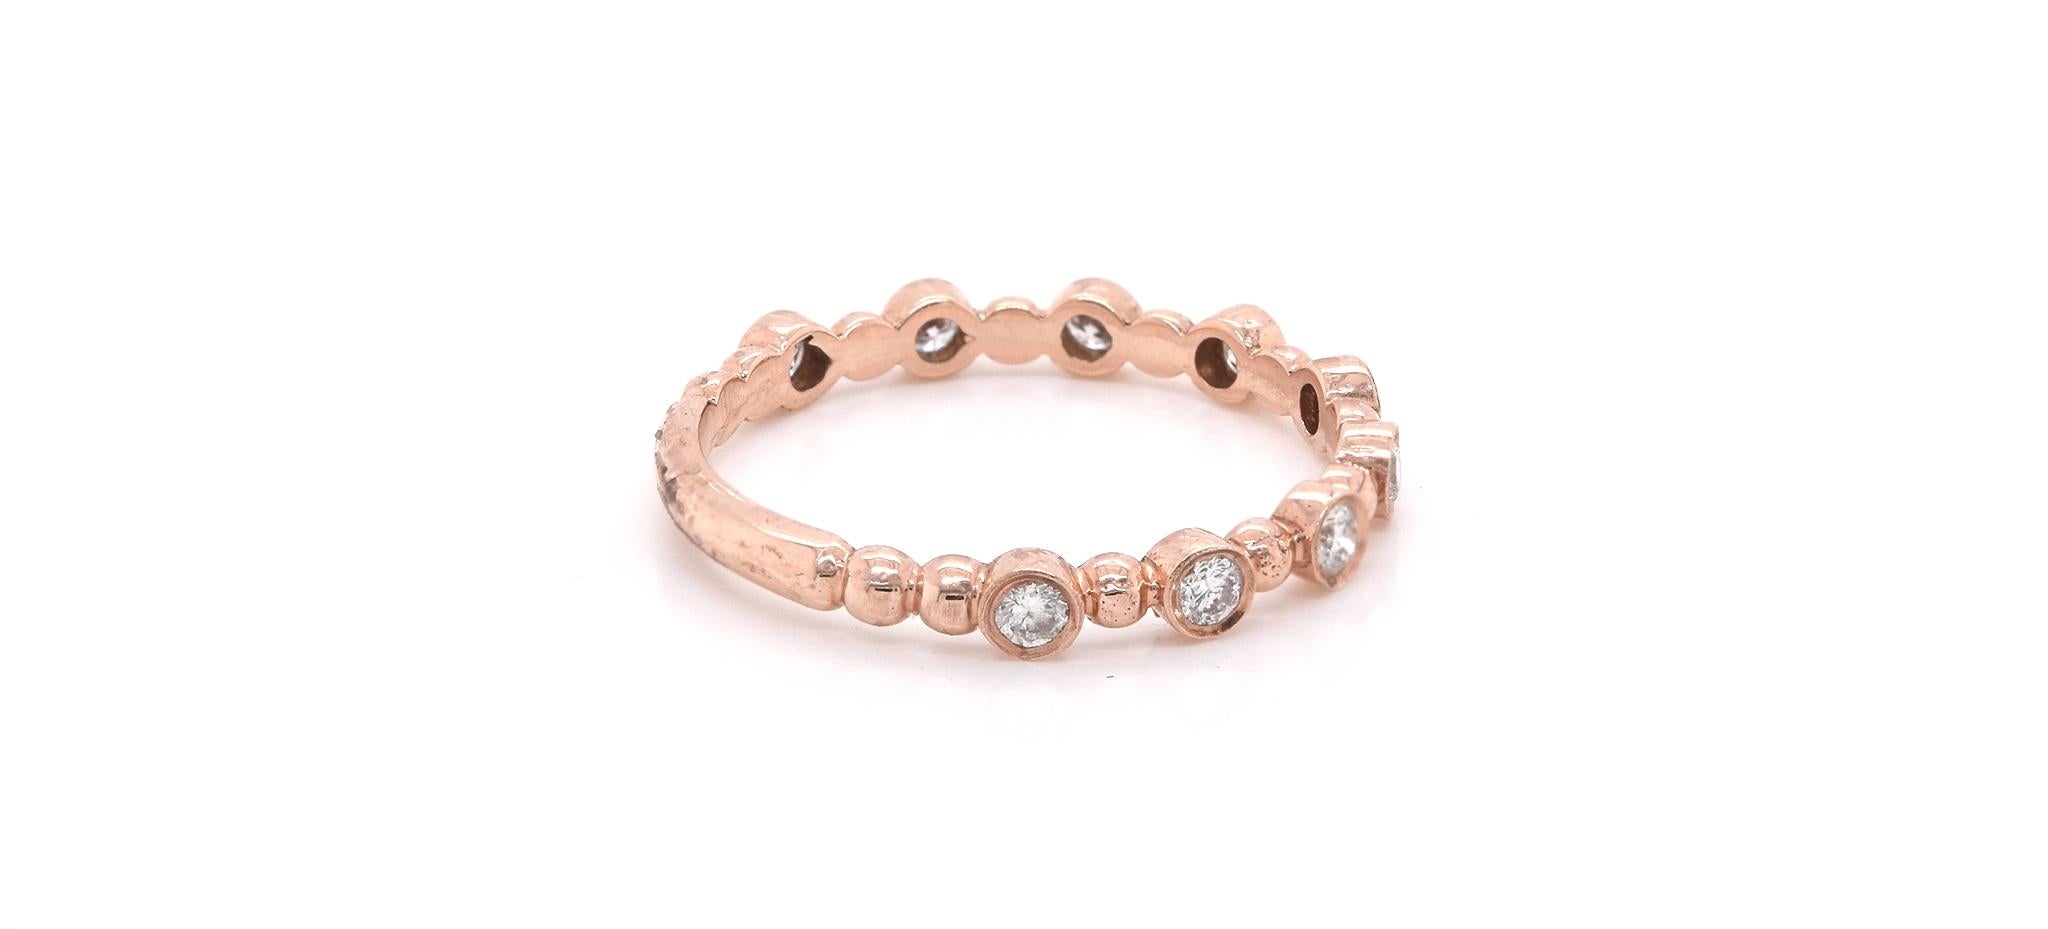 Material: 14k rose gold
Diamonds: 9 round brilliant cuts = 0.25cttw
Color: I
Clarity: SI1-SI2
Size: 5 ½ 
Dimensions: ring is 1.90mm in width
Weight: 1.29 grams
